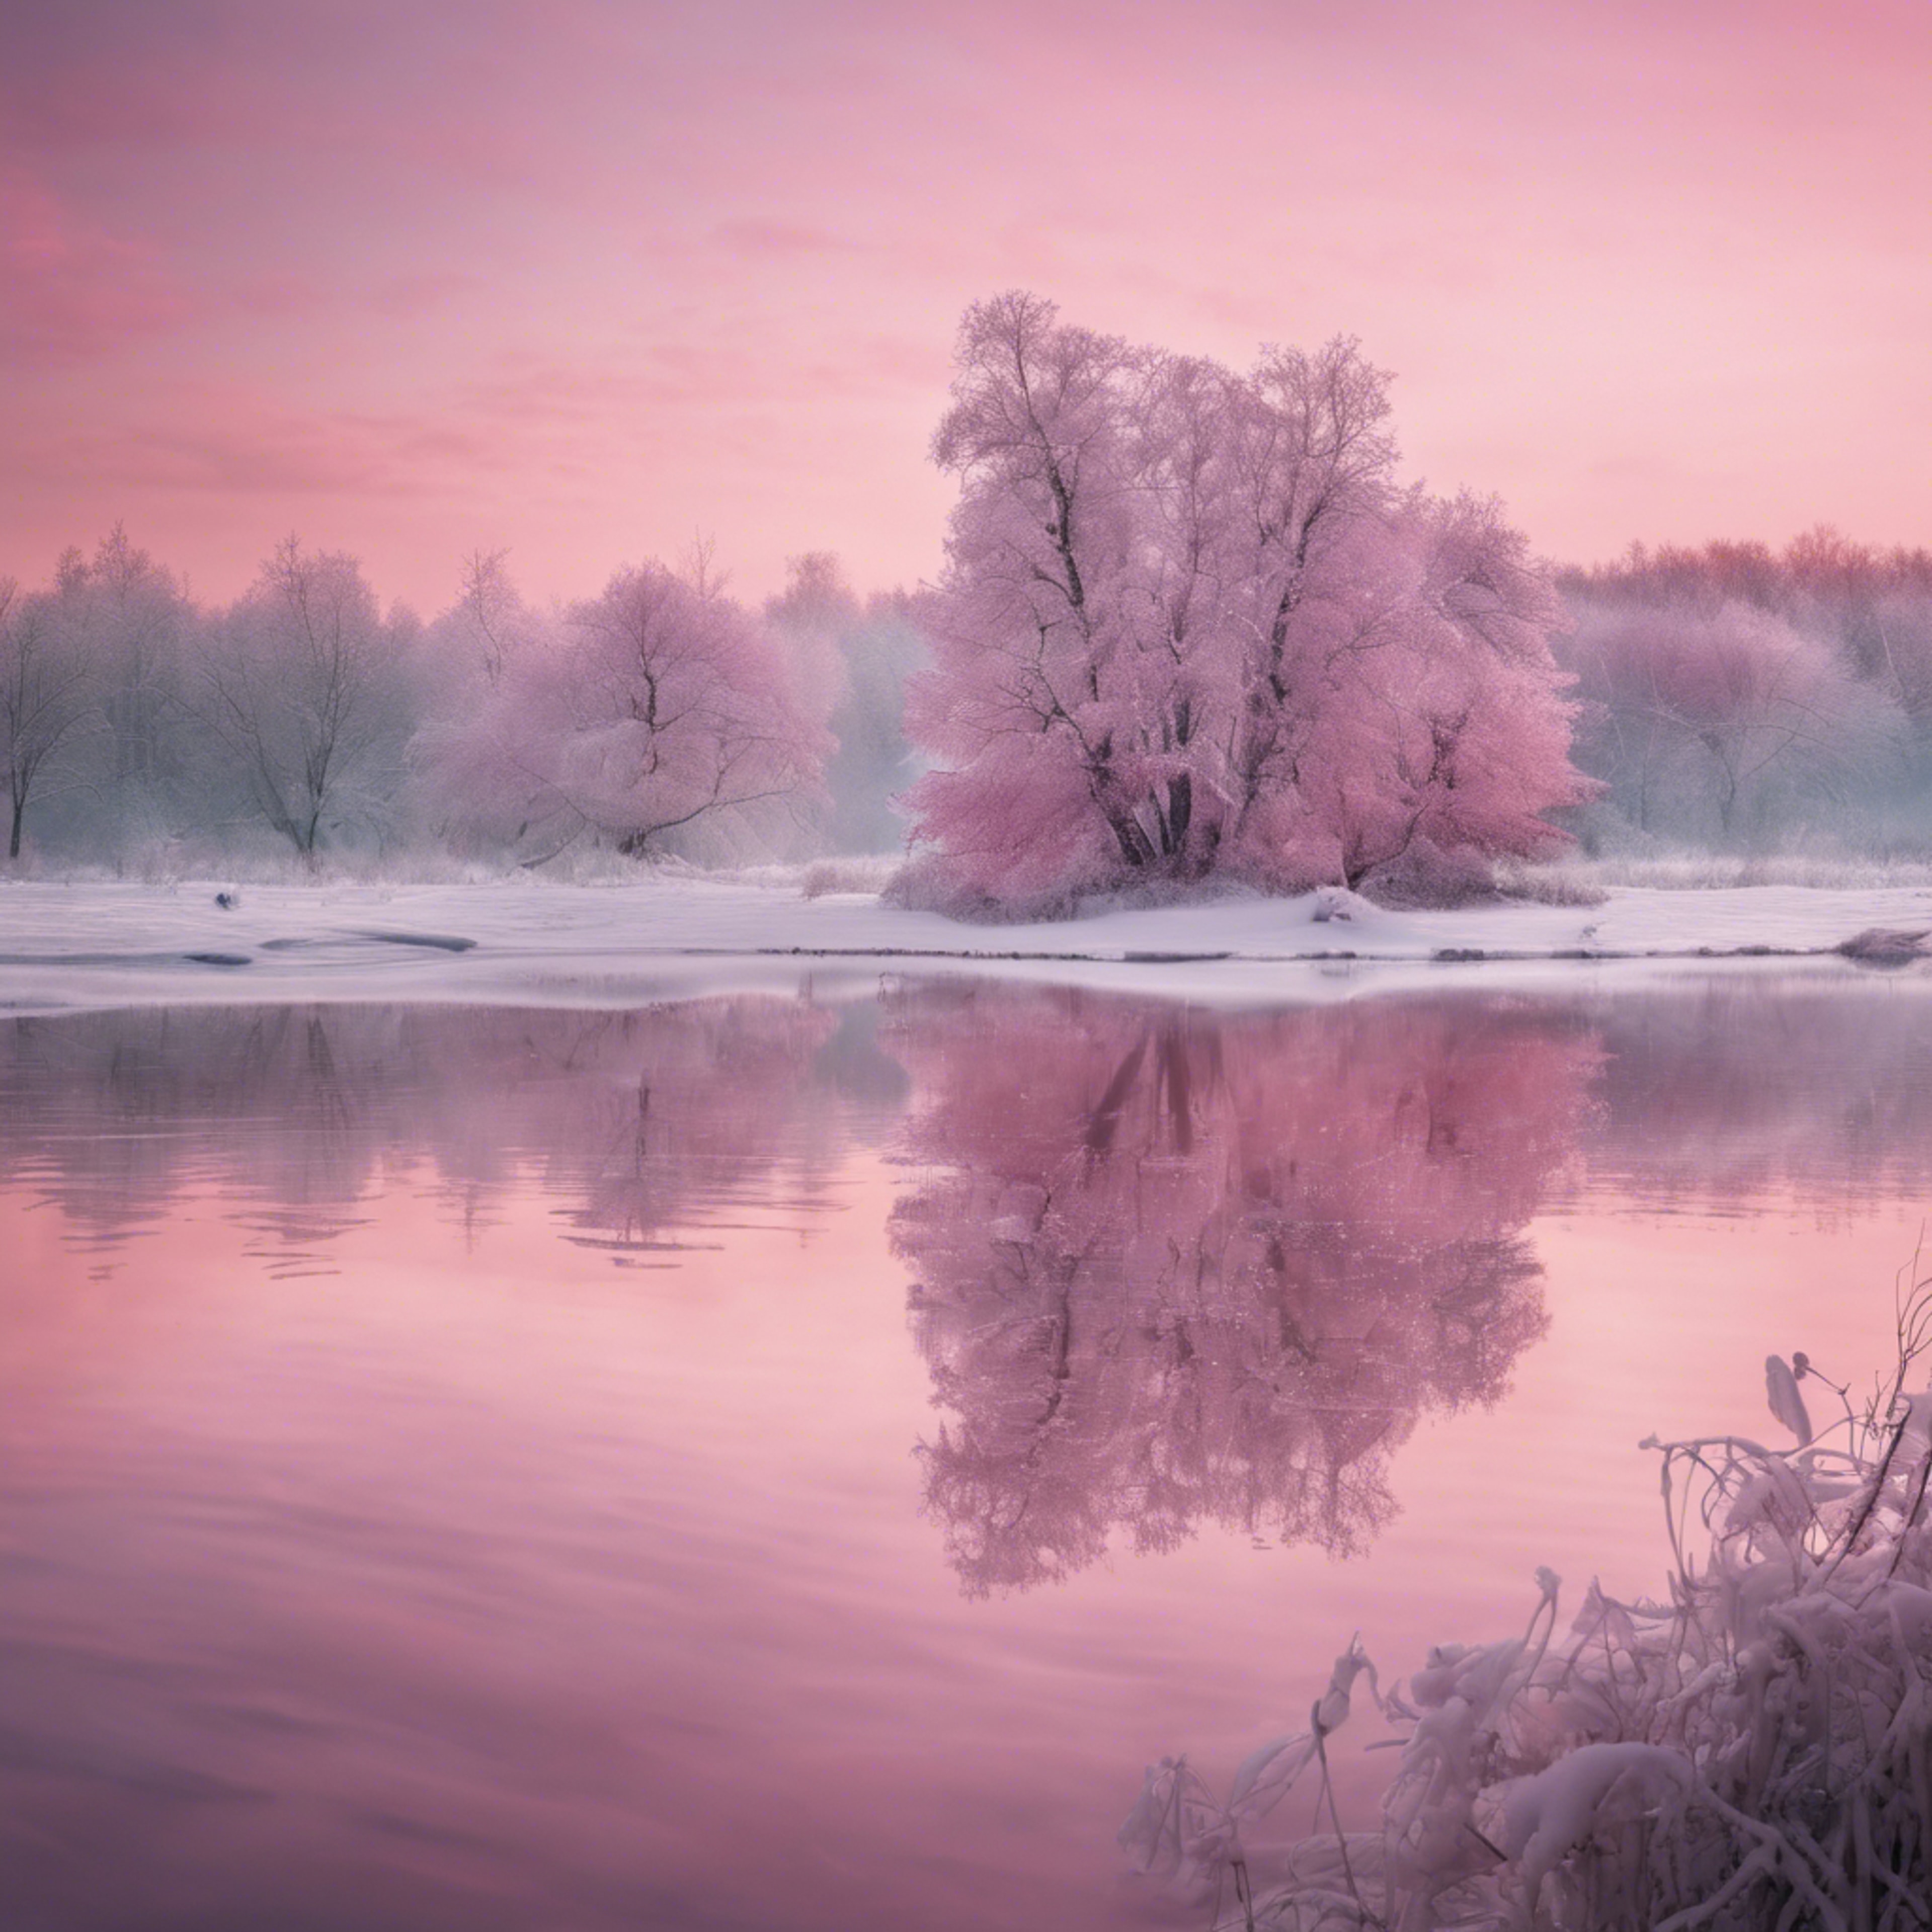 A tranquil pink Christmas morning landscape, reflections on a still frozen lake. Wallpaper[99be3b4566ac4908b7ca]